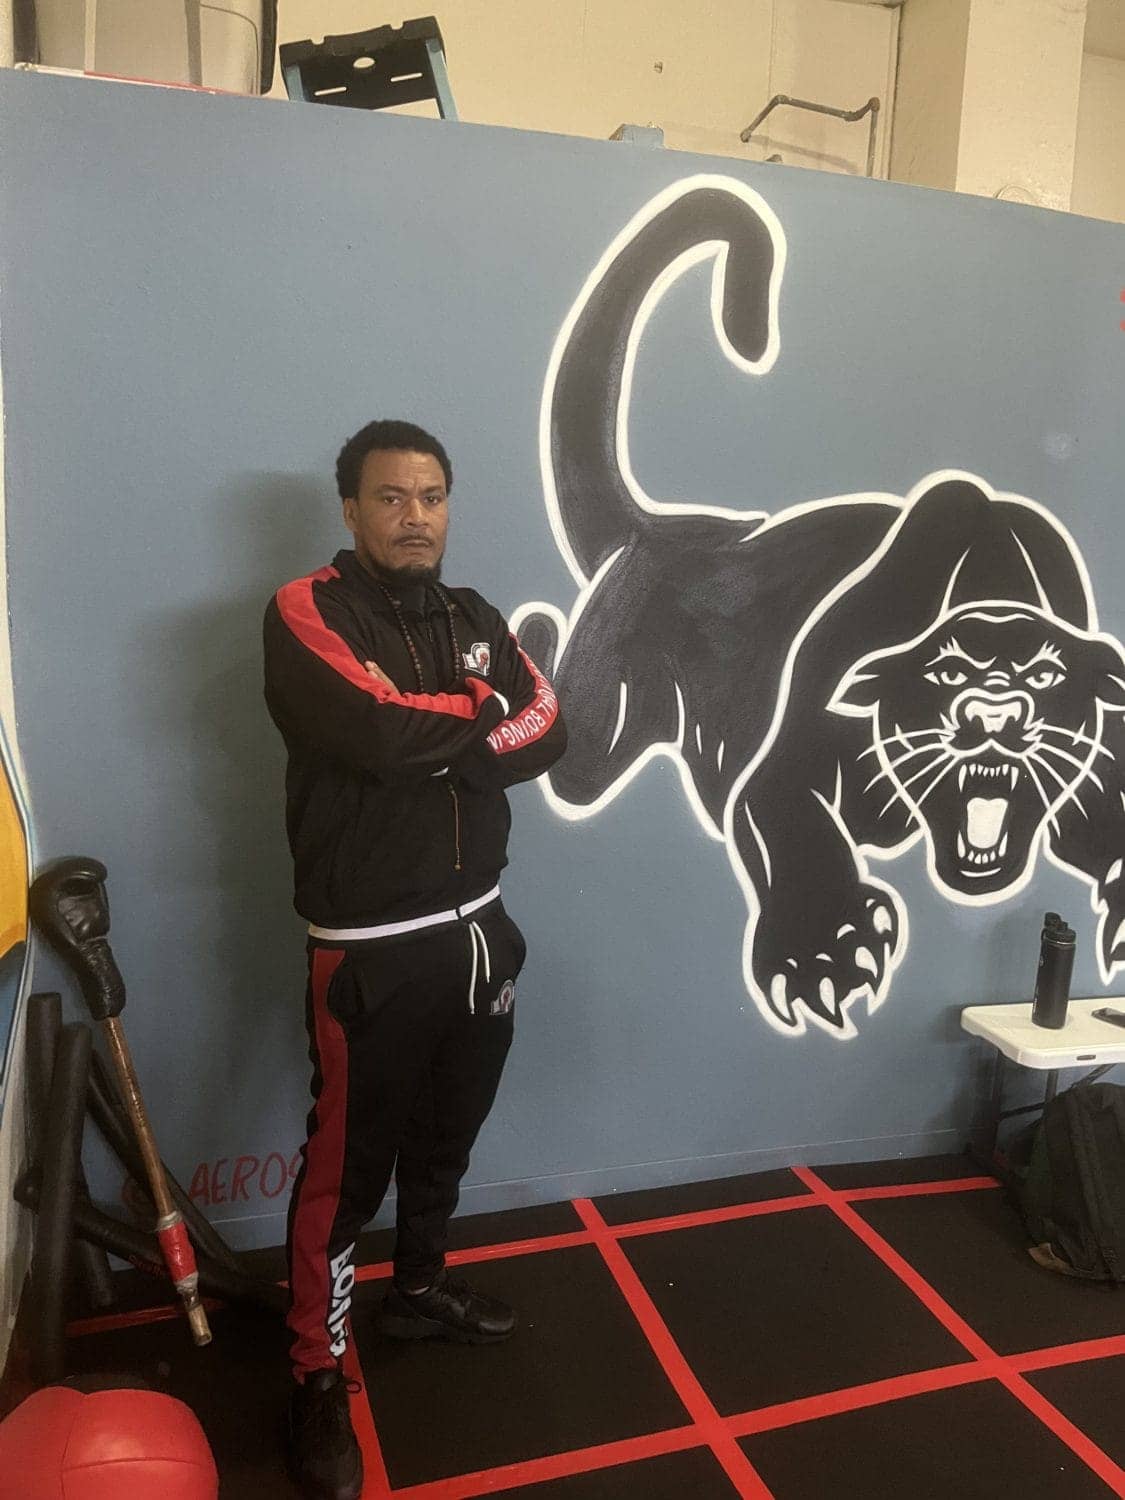 Bilal-Mahasin-at-his-boxing-gym-Oakland-2023, Oakland Institute for Boxing, Featured Local News & Views 